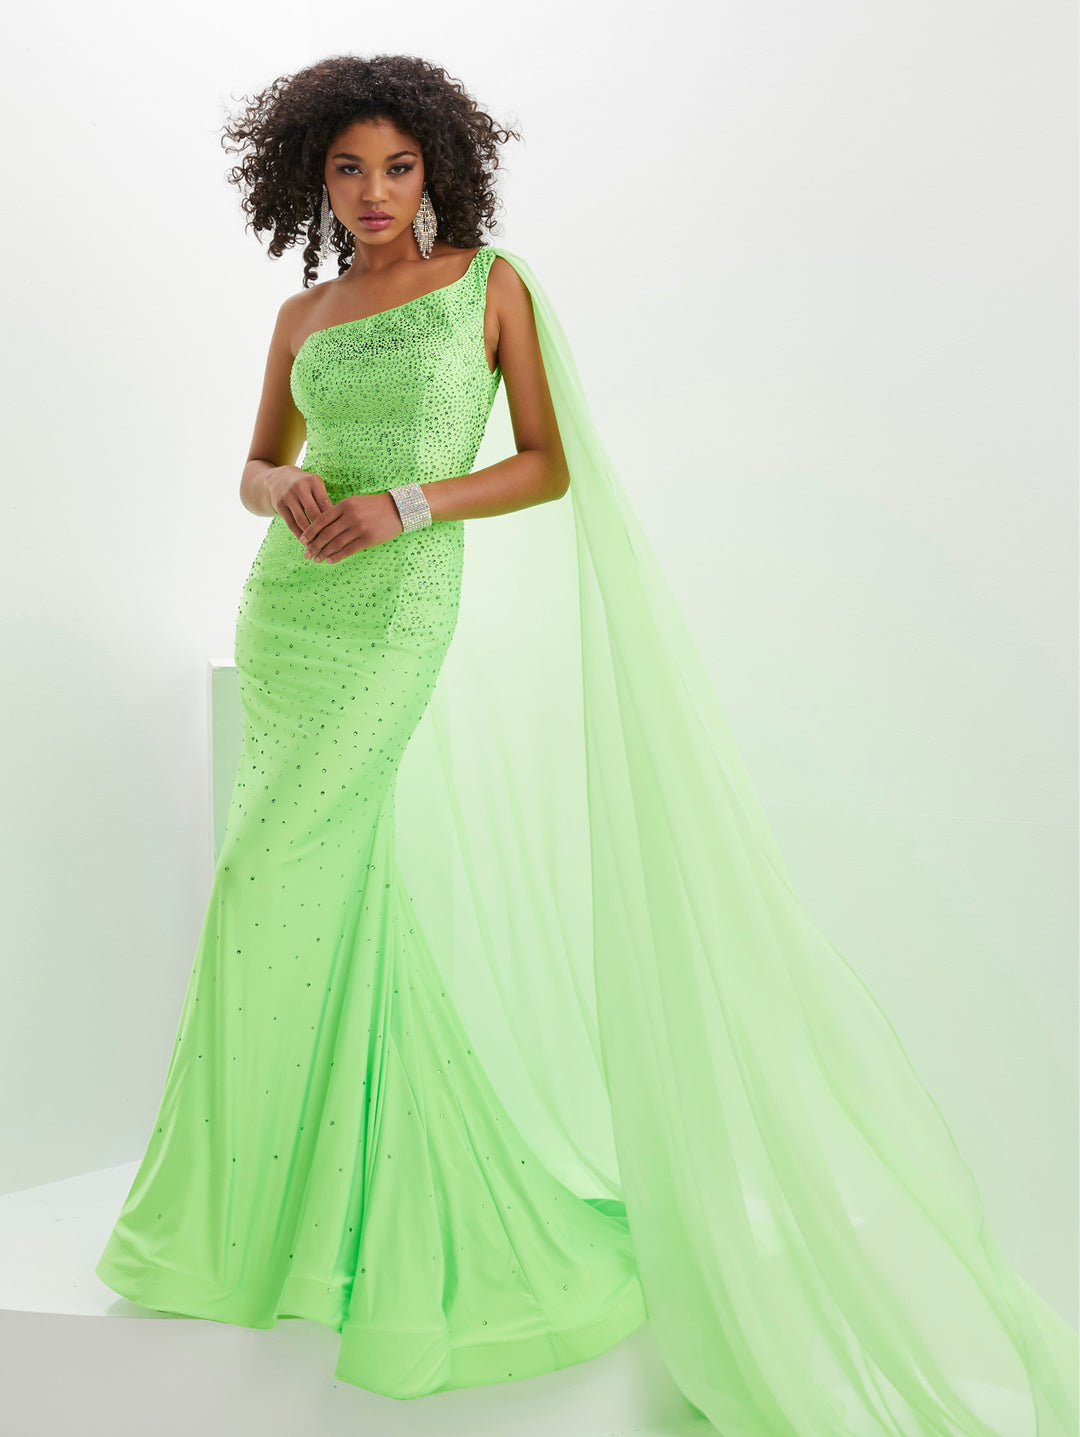 Fitted Beaded Spandex One Shoulder Gown by Panoply 14135